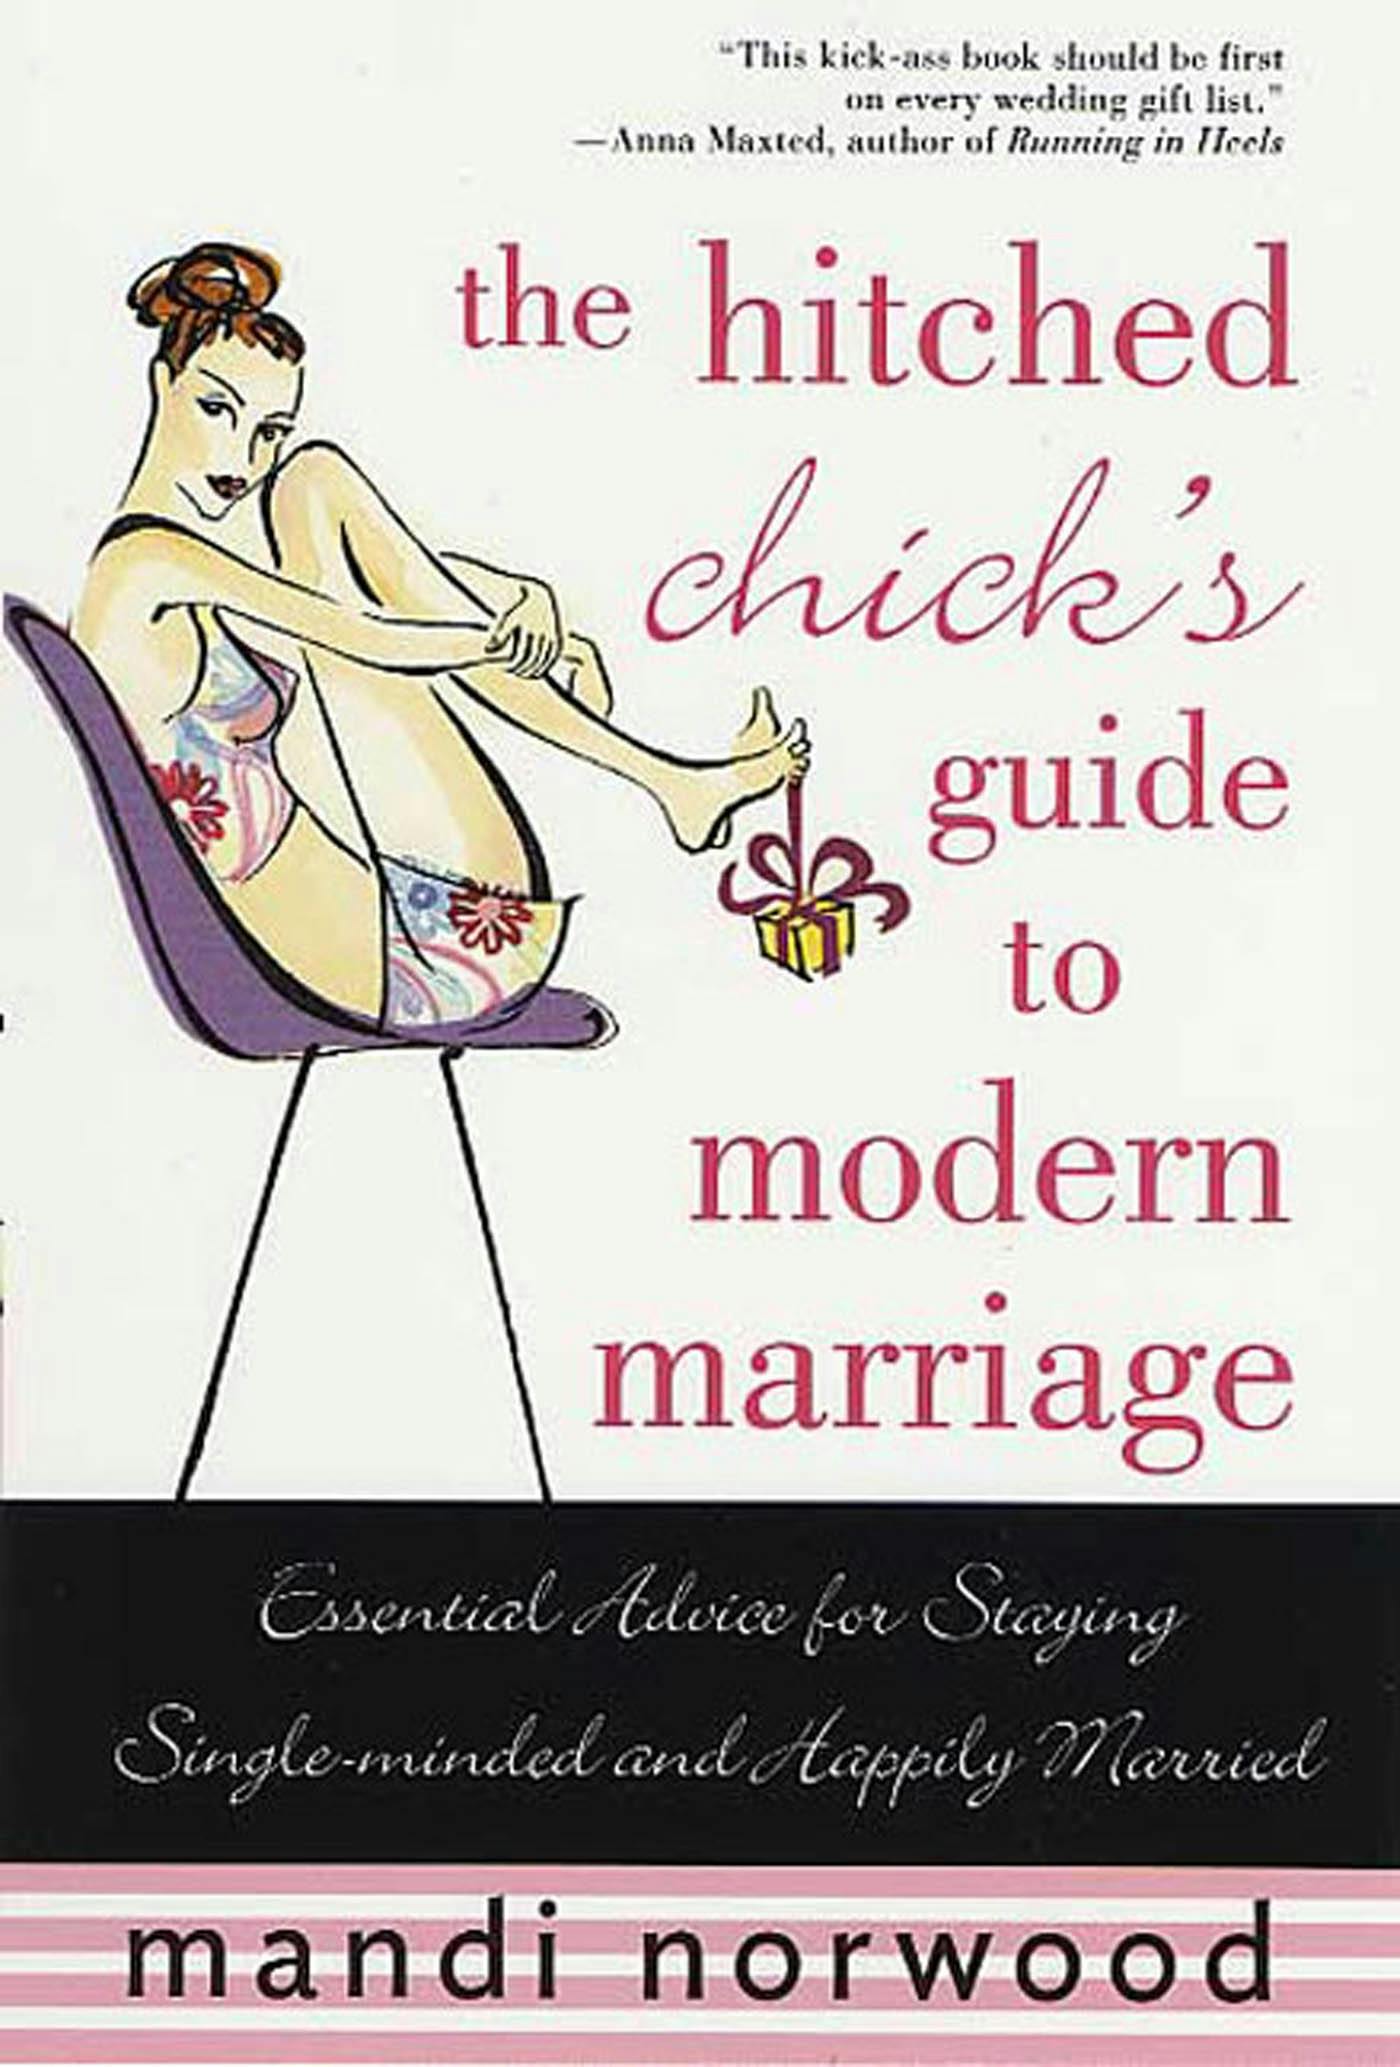 The Hitched Chick's Guide to Modern Marriage